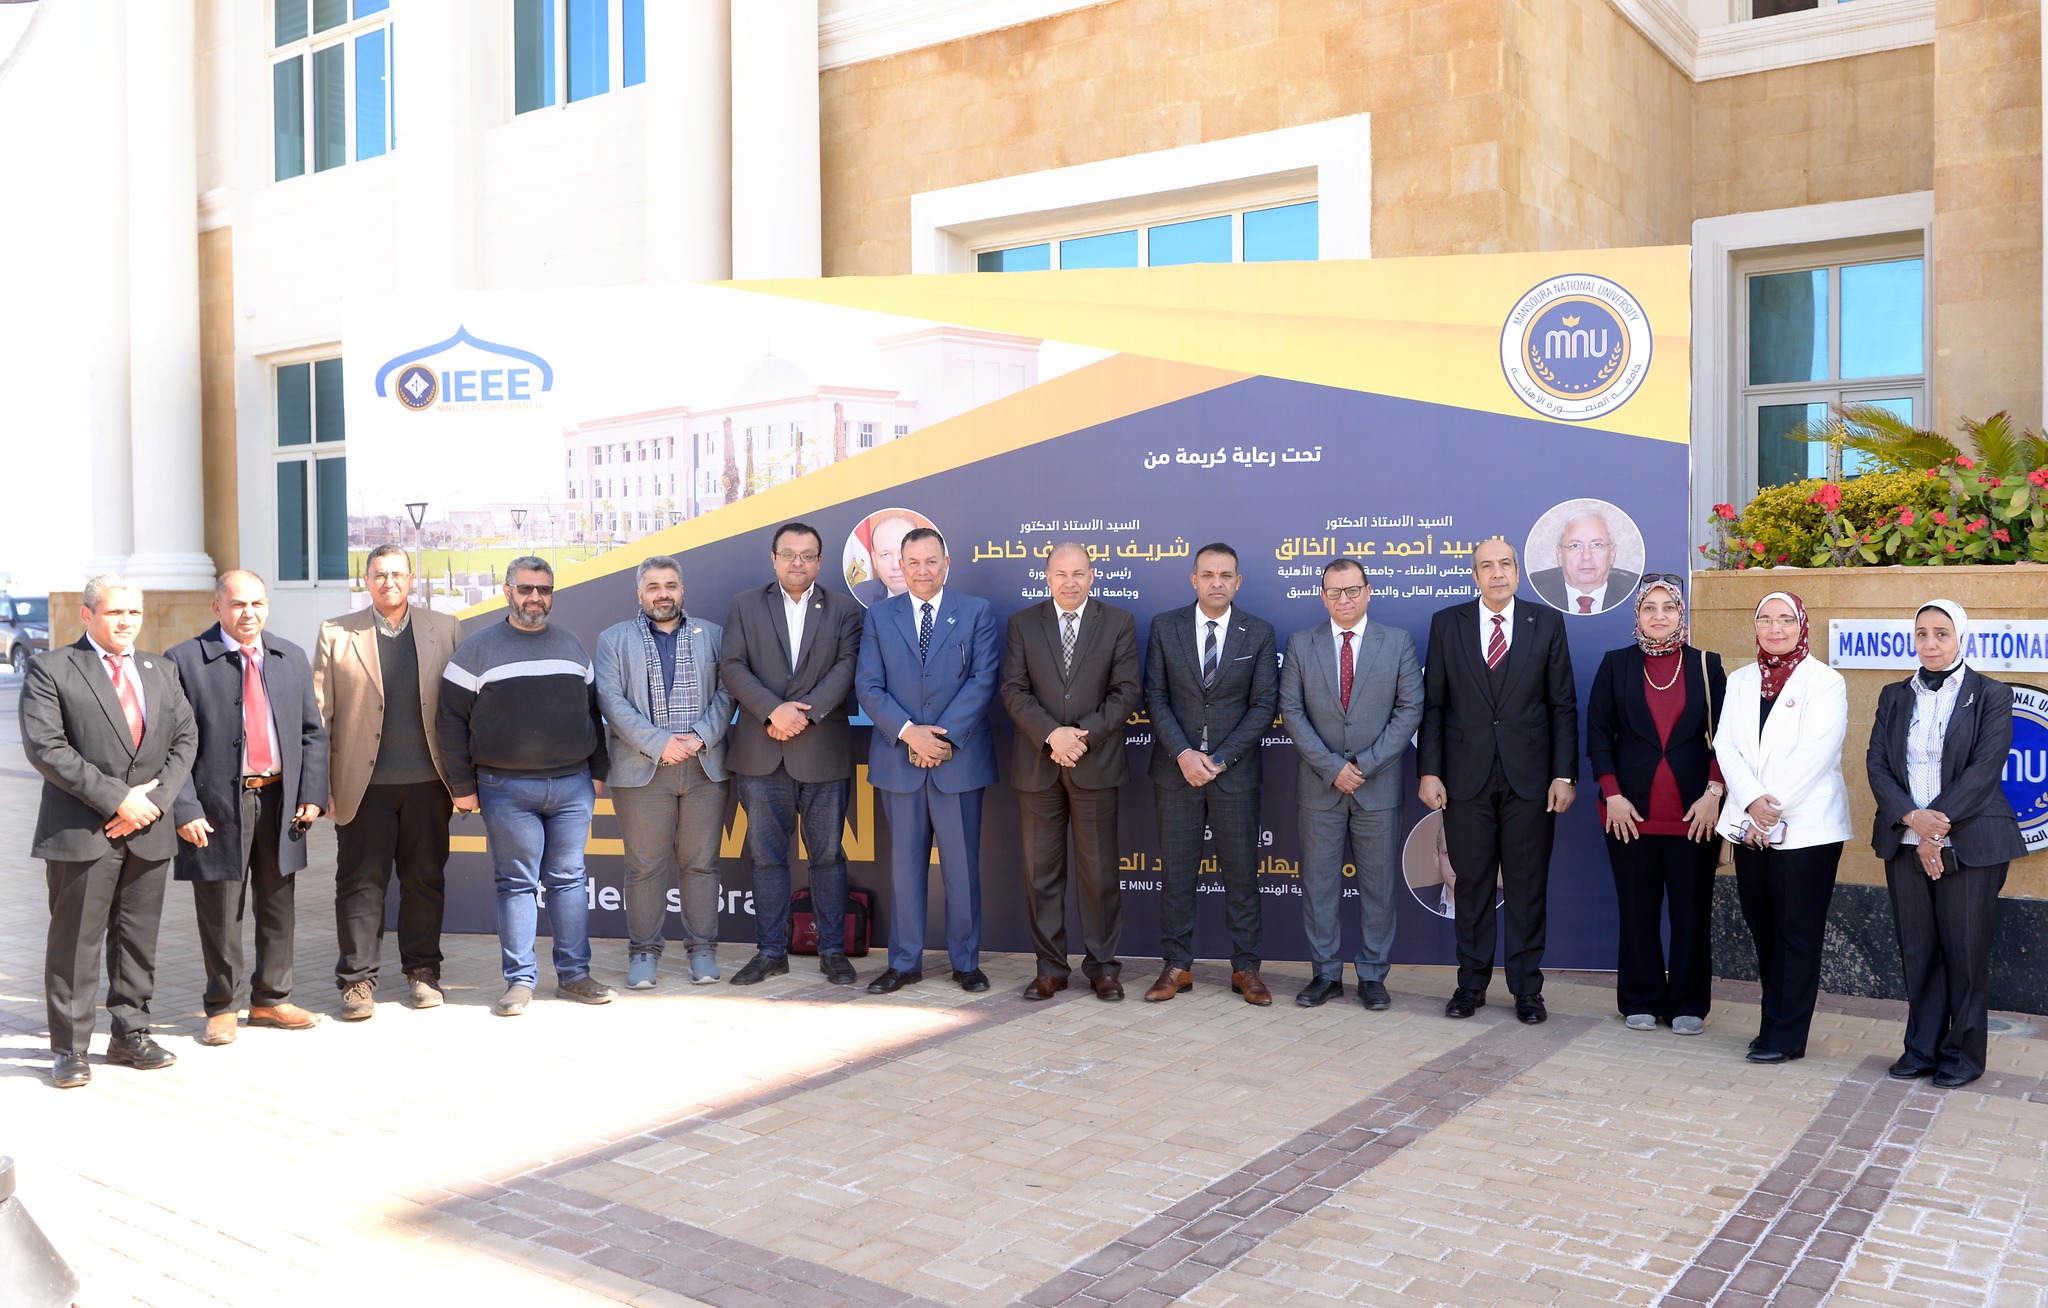 Mansoura National University opens a branch of IEEE “Institute of Electrical and Electronics Engineers” to support innovation and creativity for students.